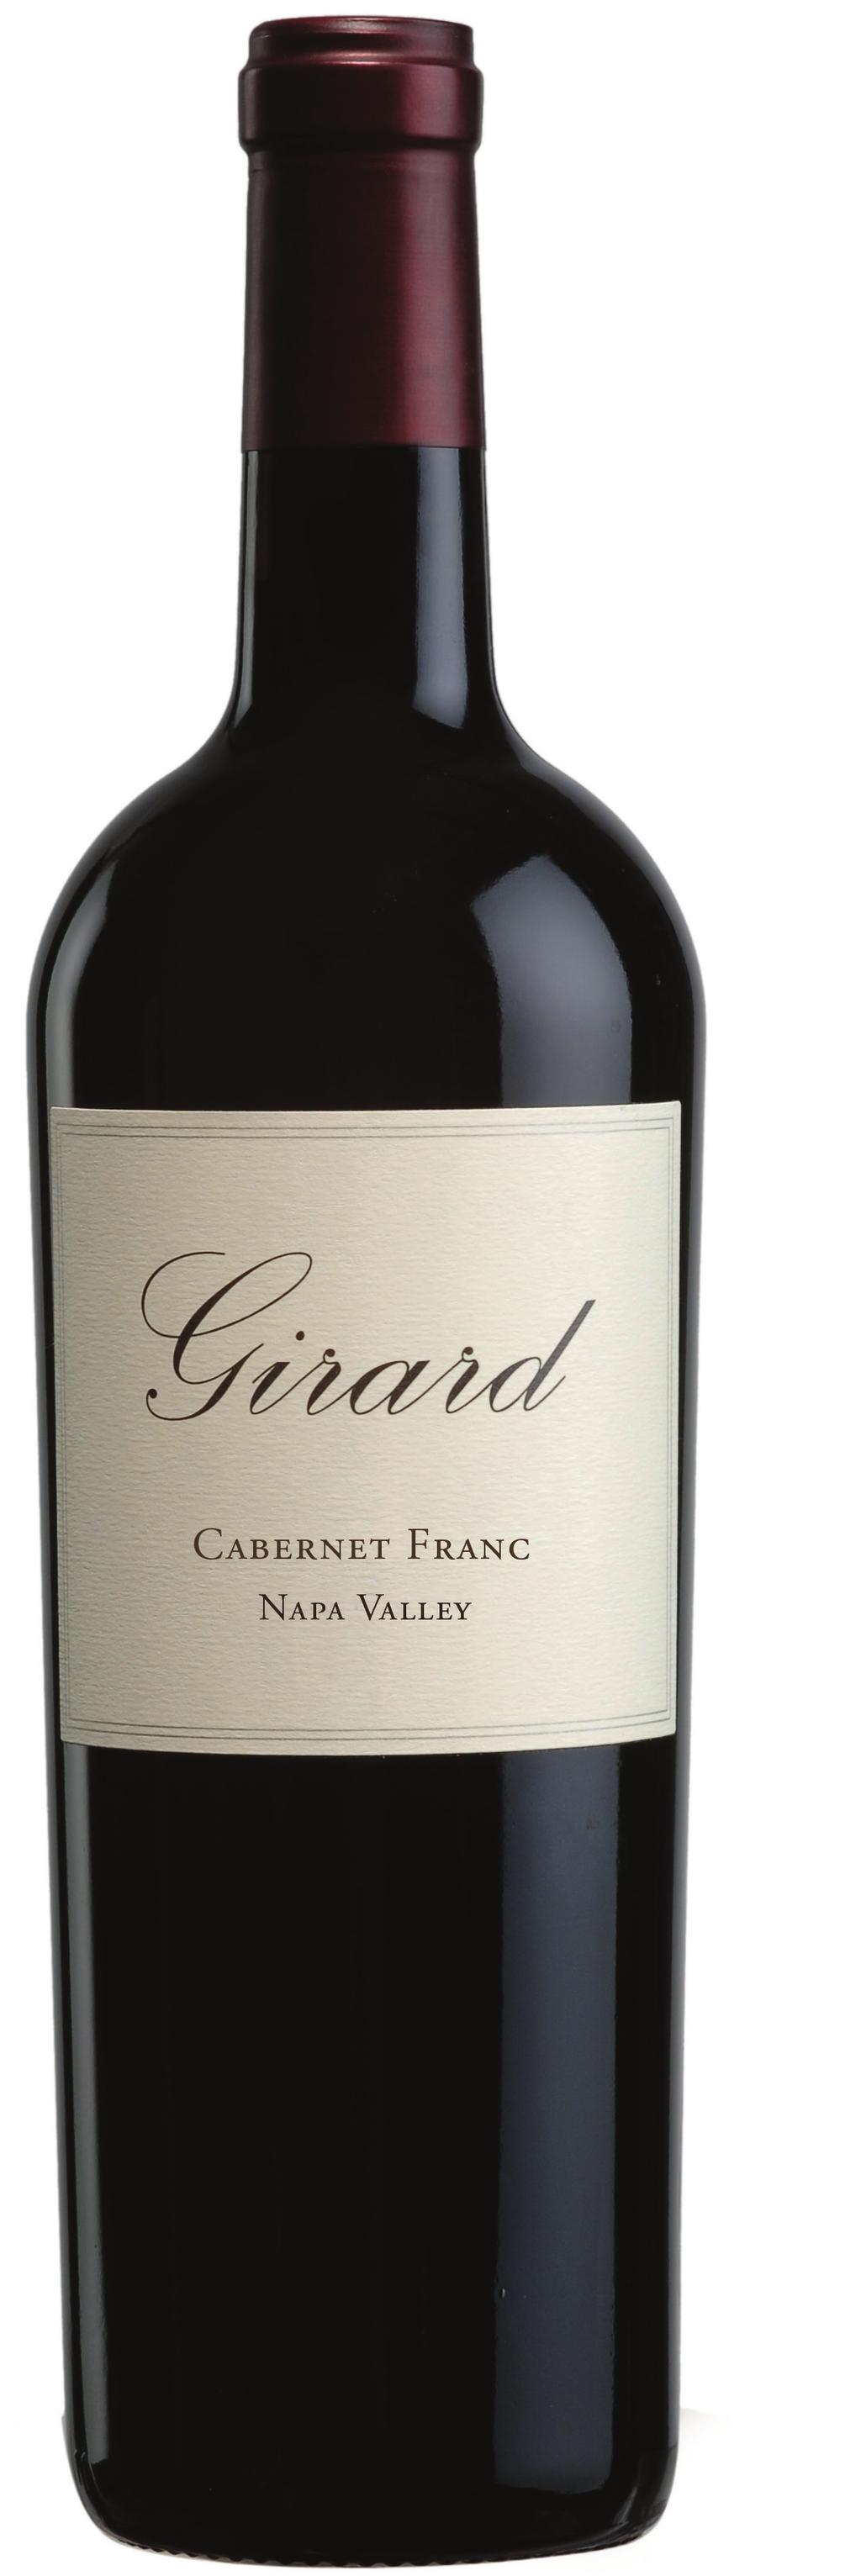 2013 Cabnet Franc Napa Valley New Release Aromas suggest holiday spice, dark fruit, and floral notes.